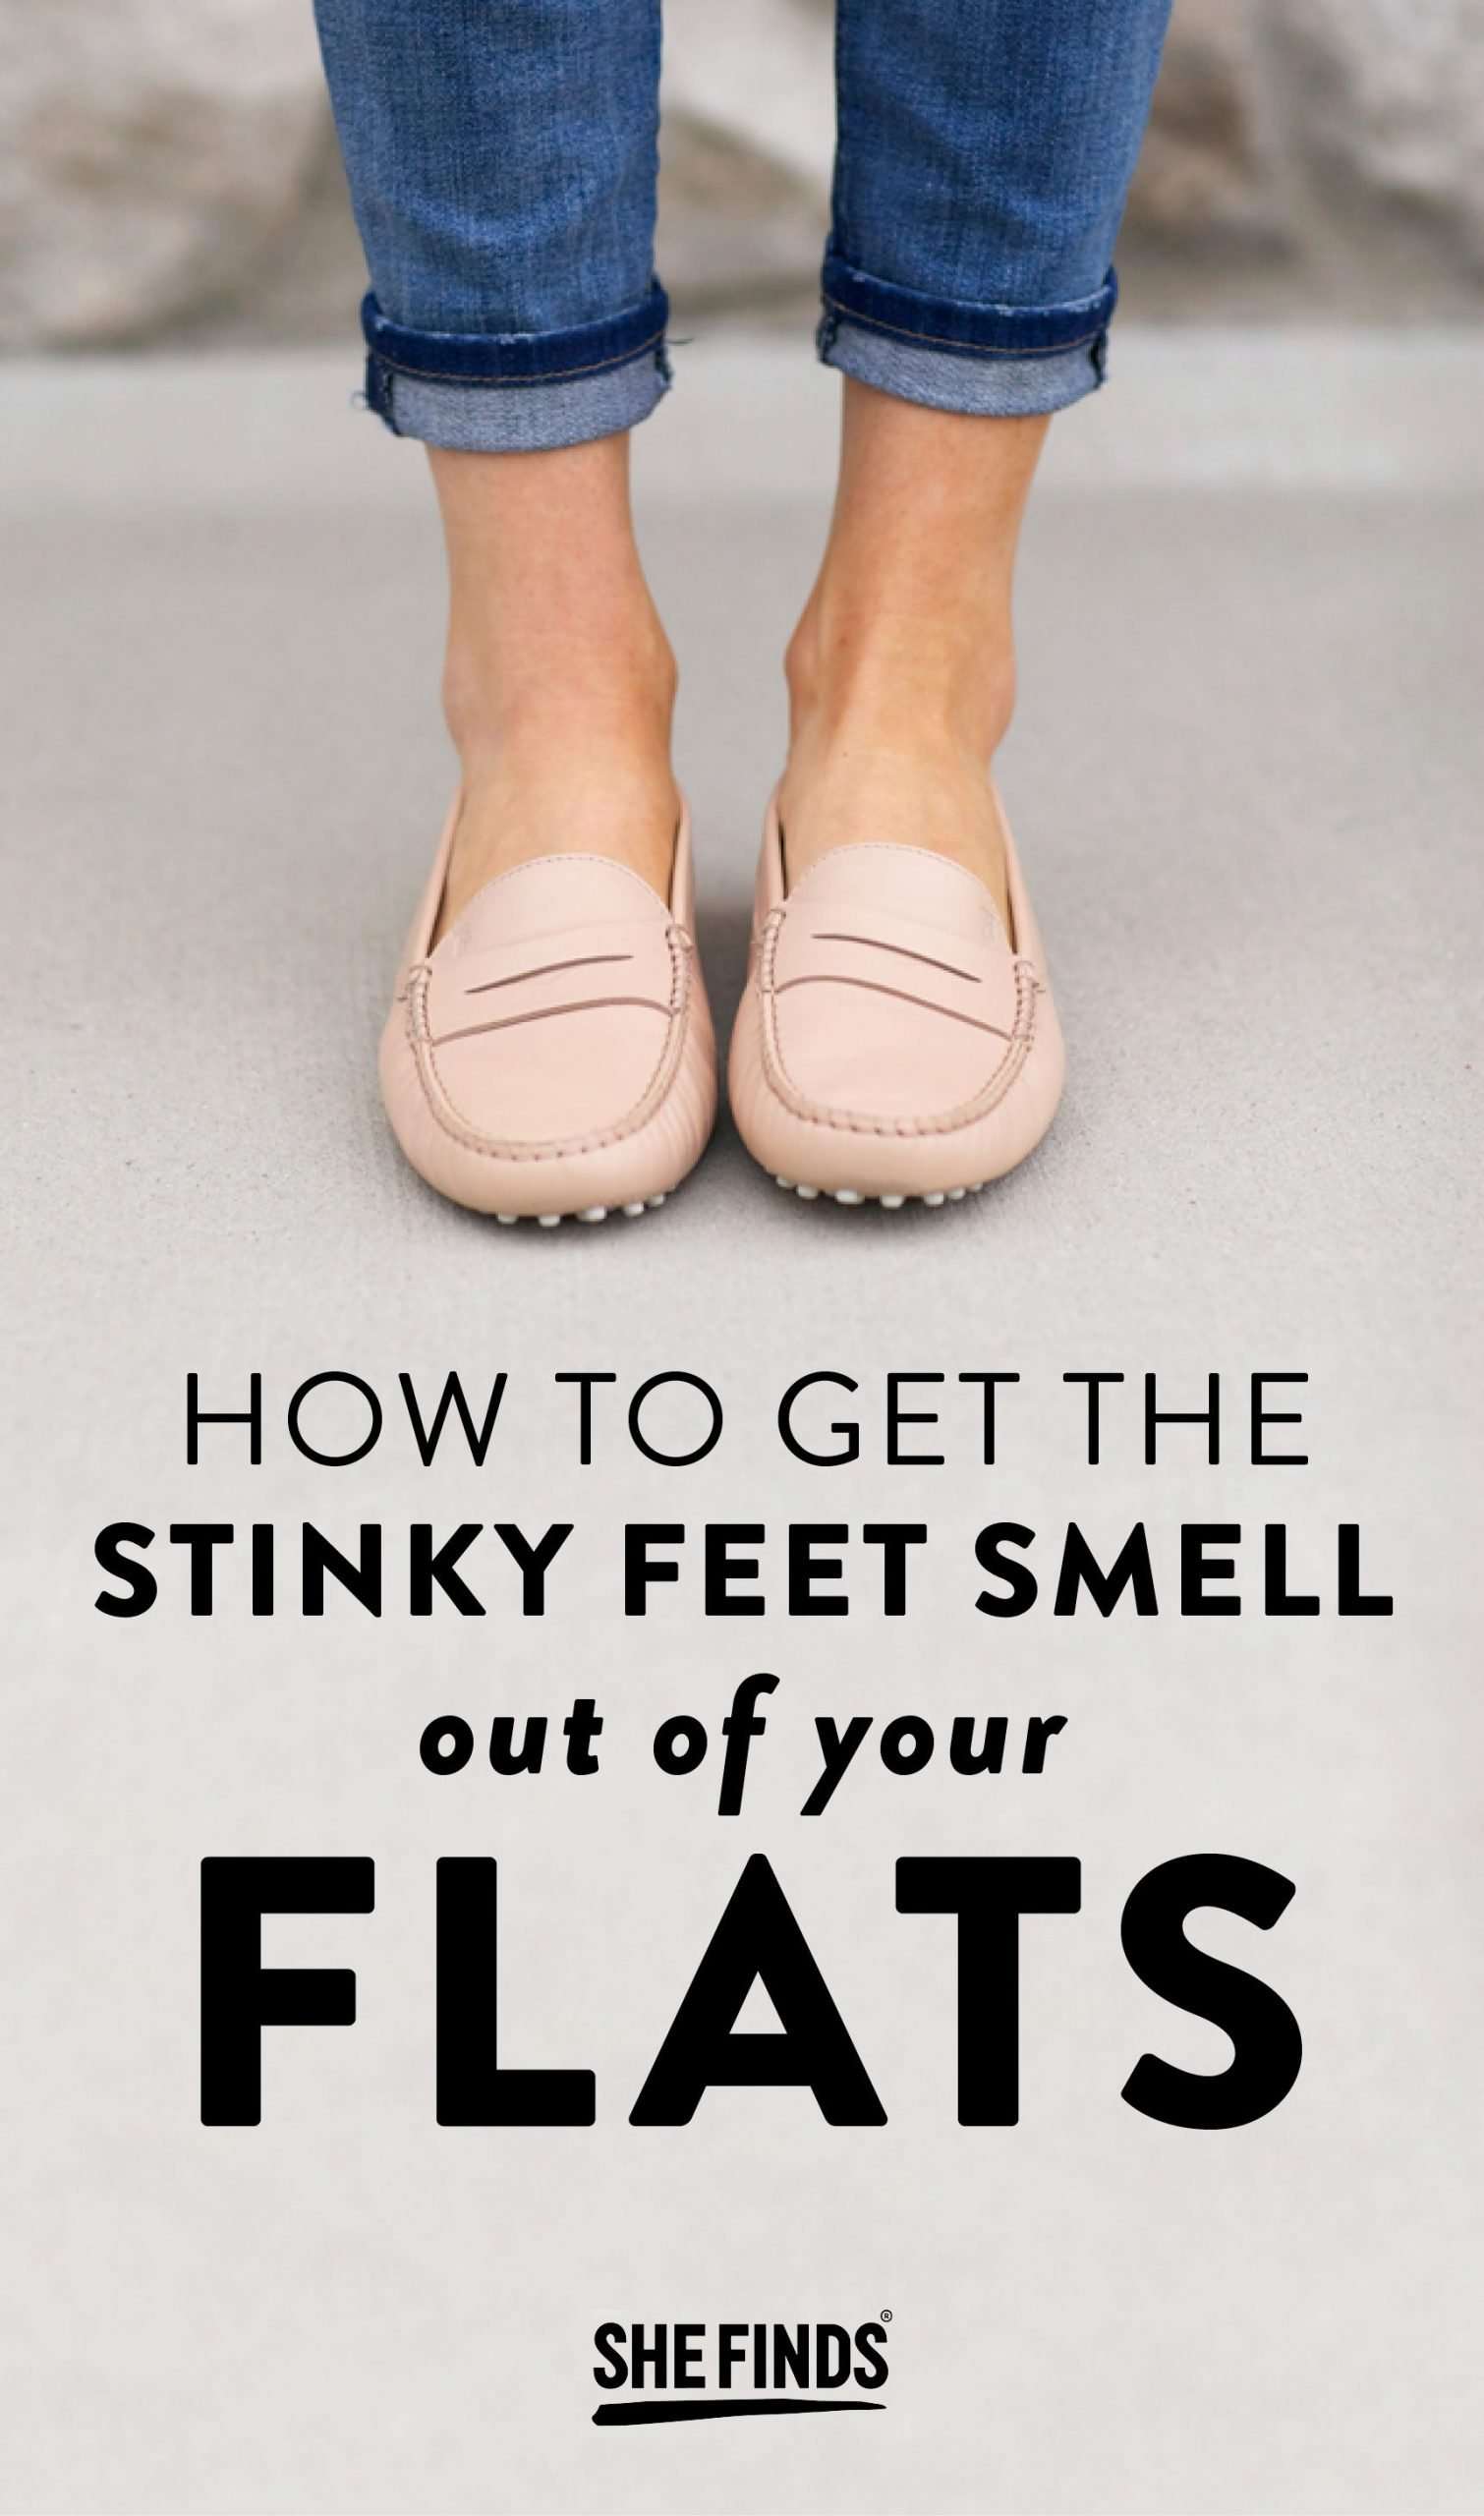 How To Get Stinky Feet Smell Out Of Flats